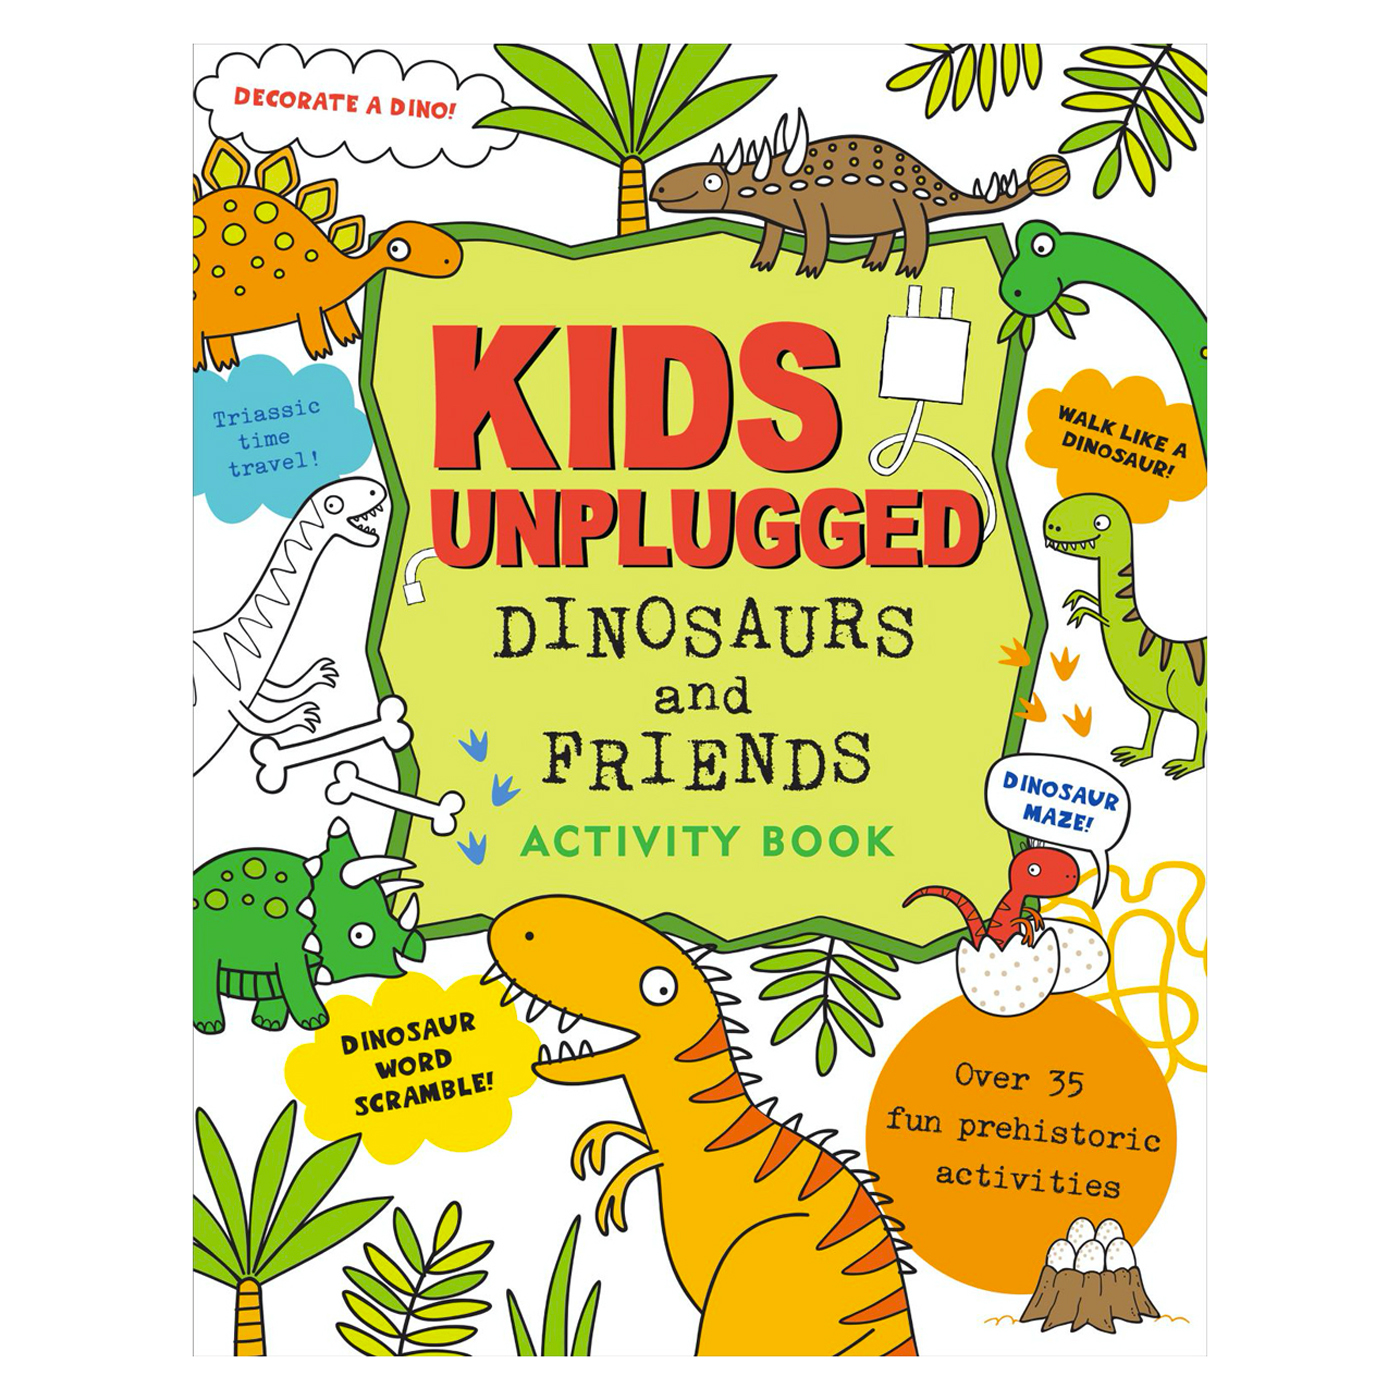  Kids Unplugged Dinosaurs and Friends Activity Book